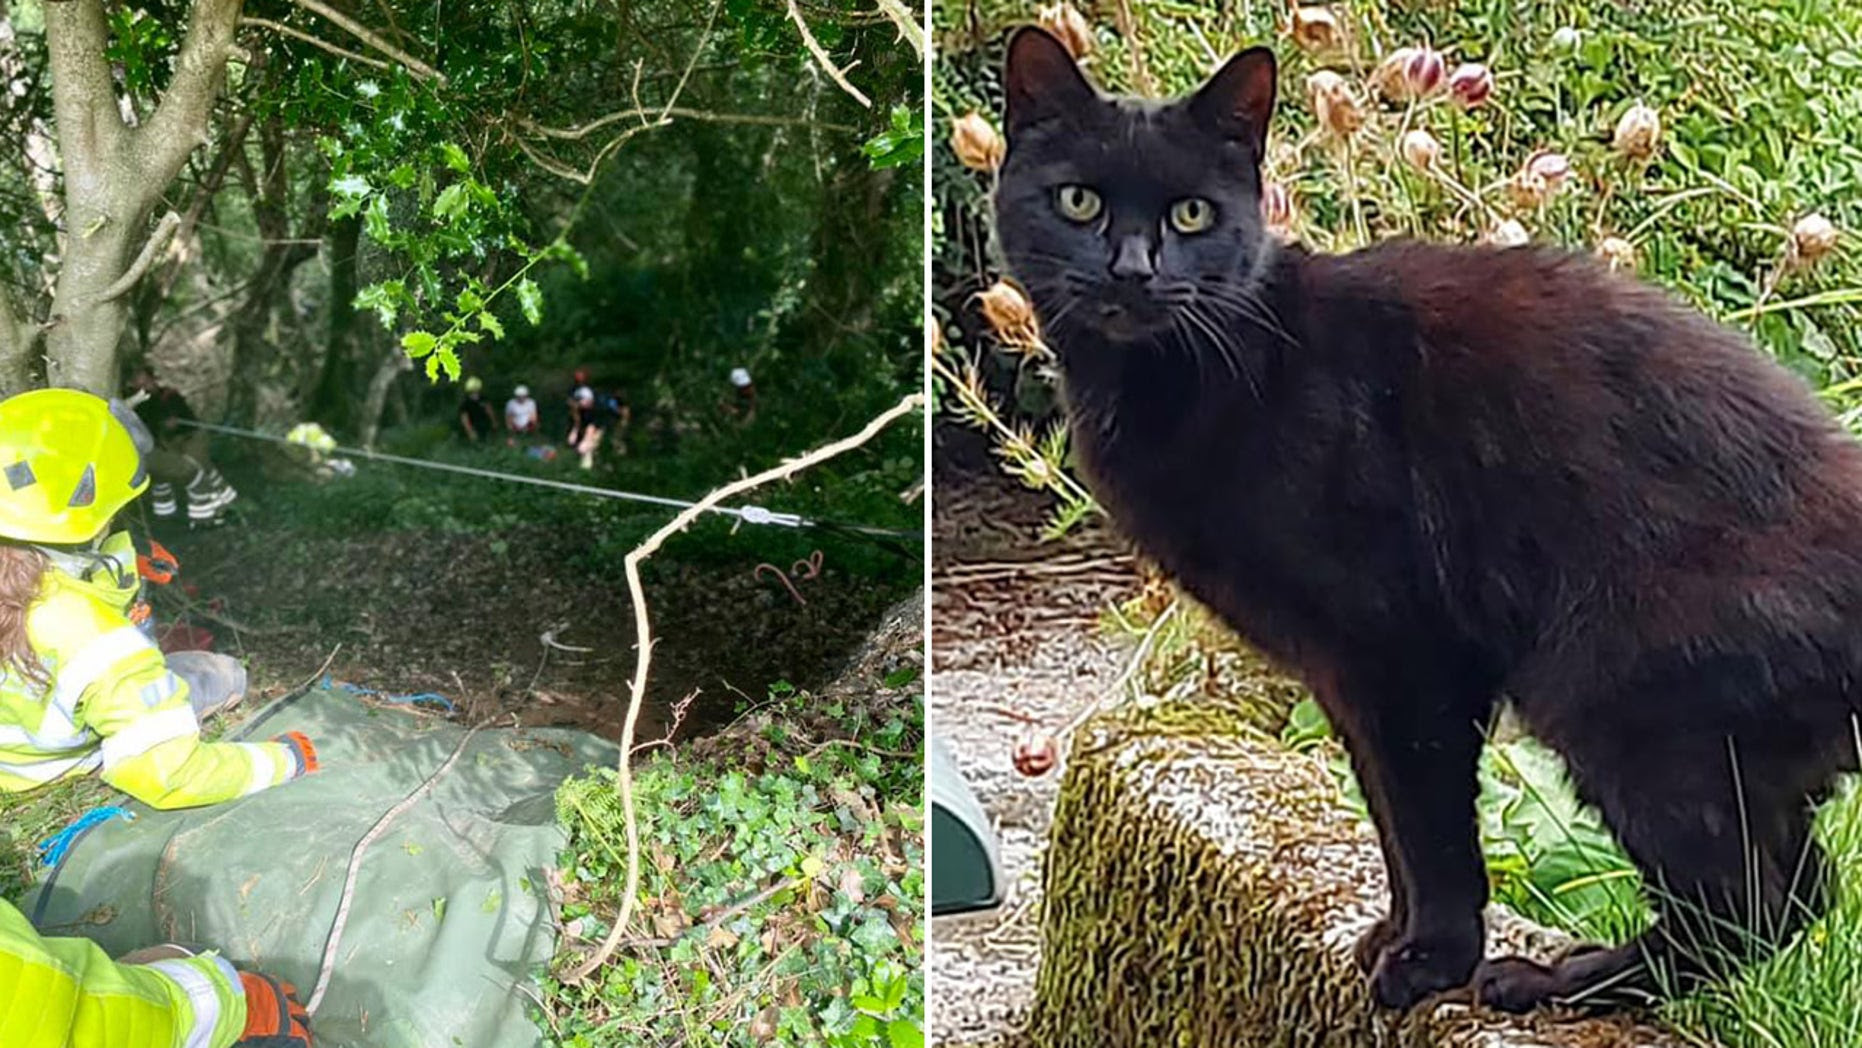 A cat's meowing helps rescuers find its owner, who fell down a ravine